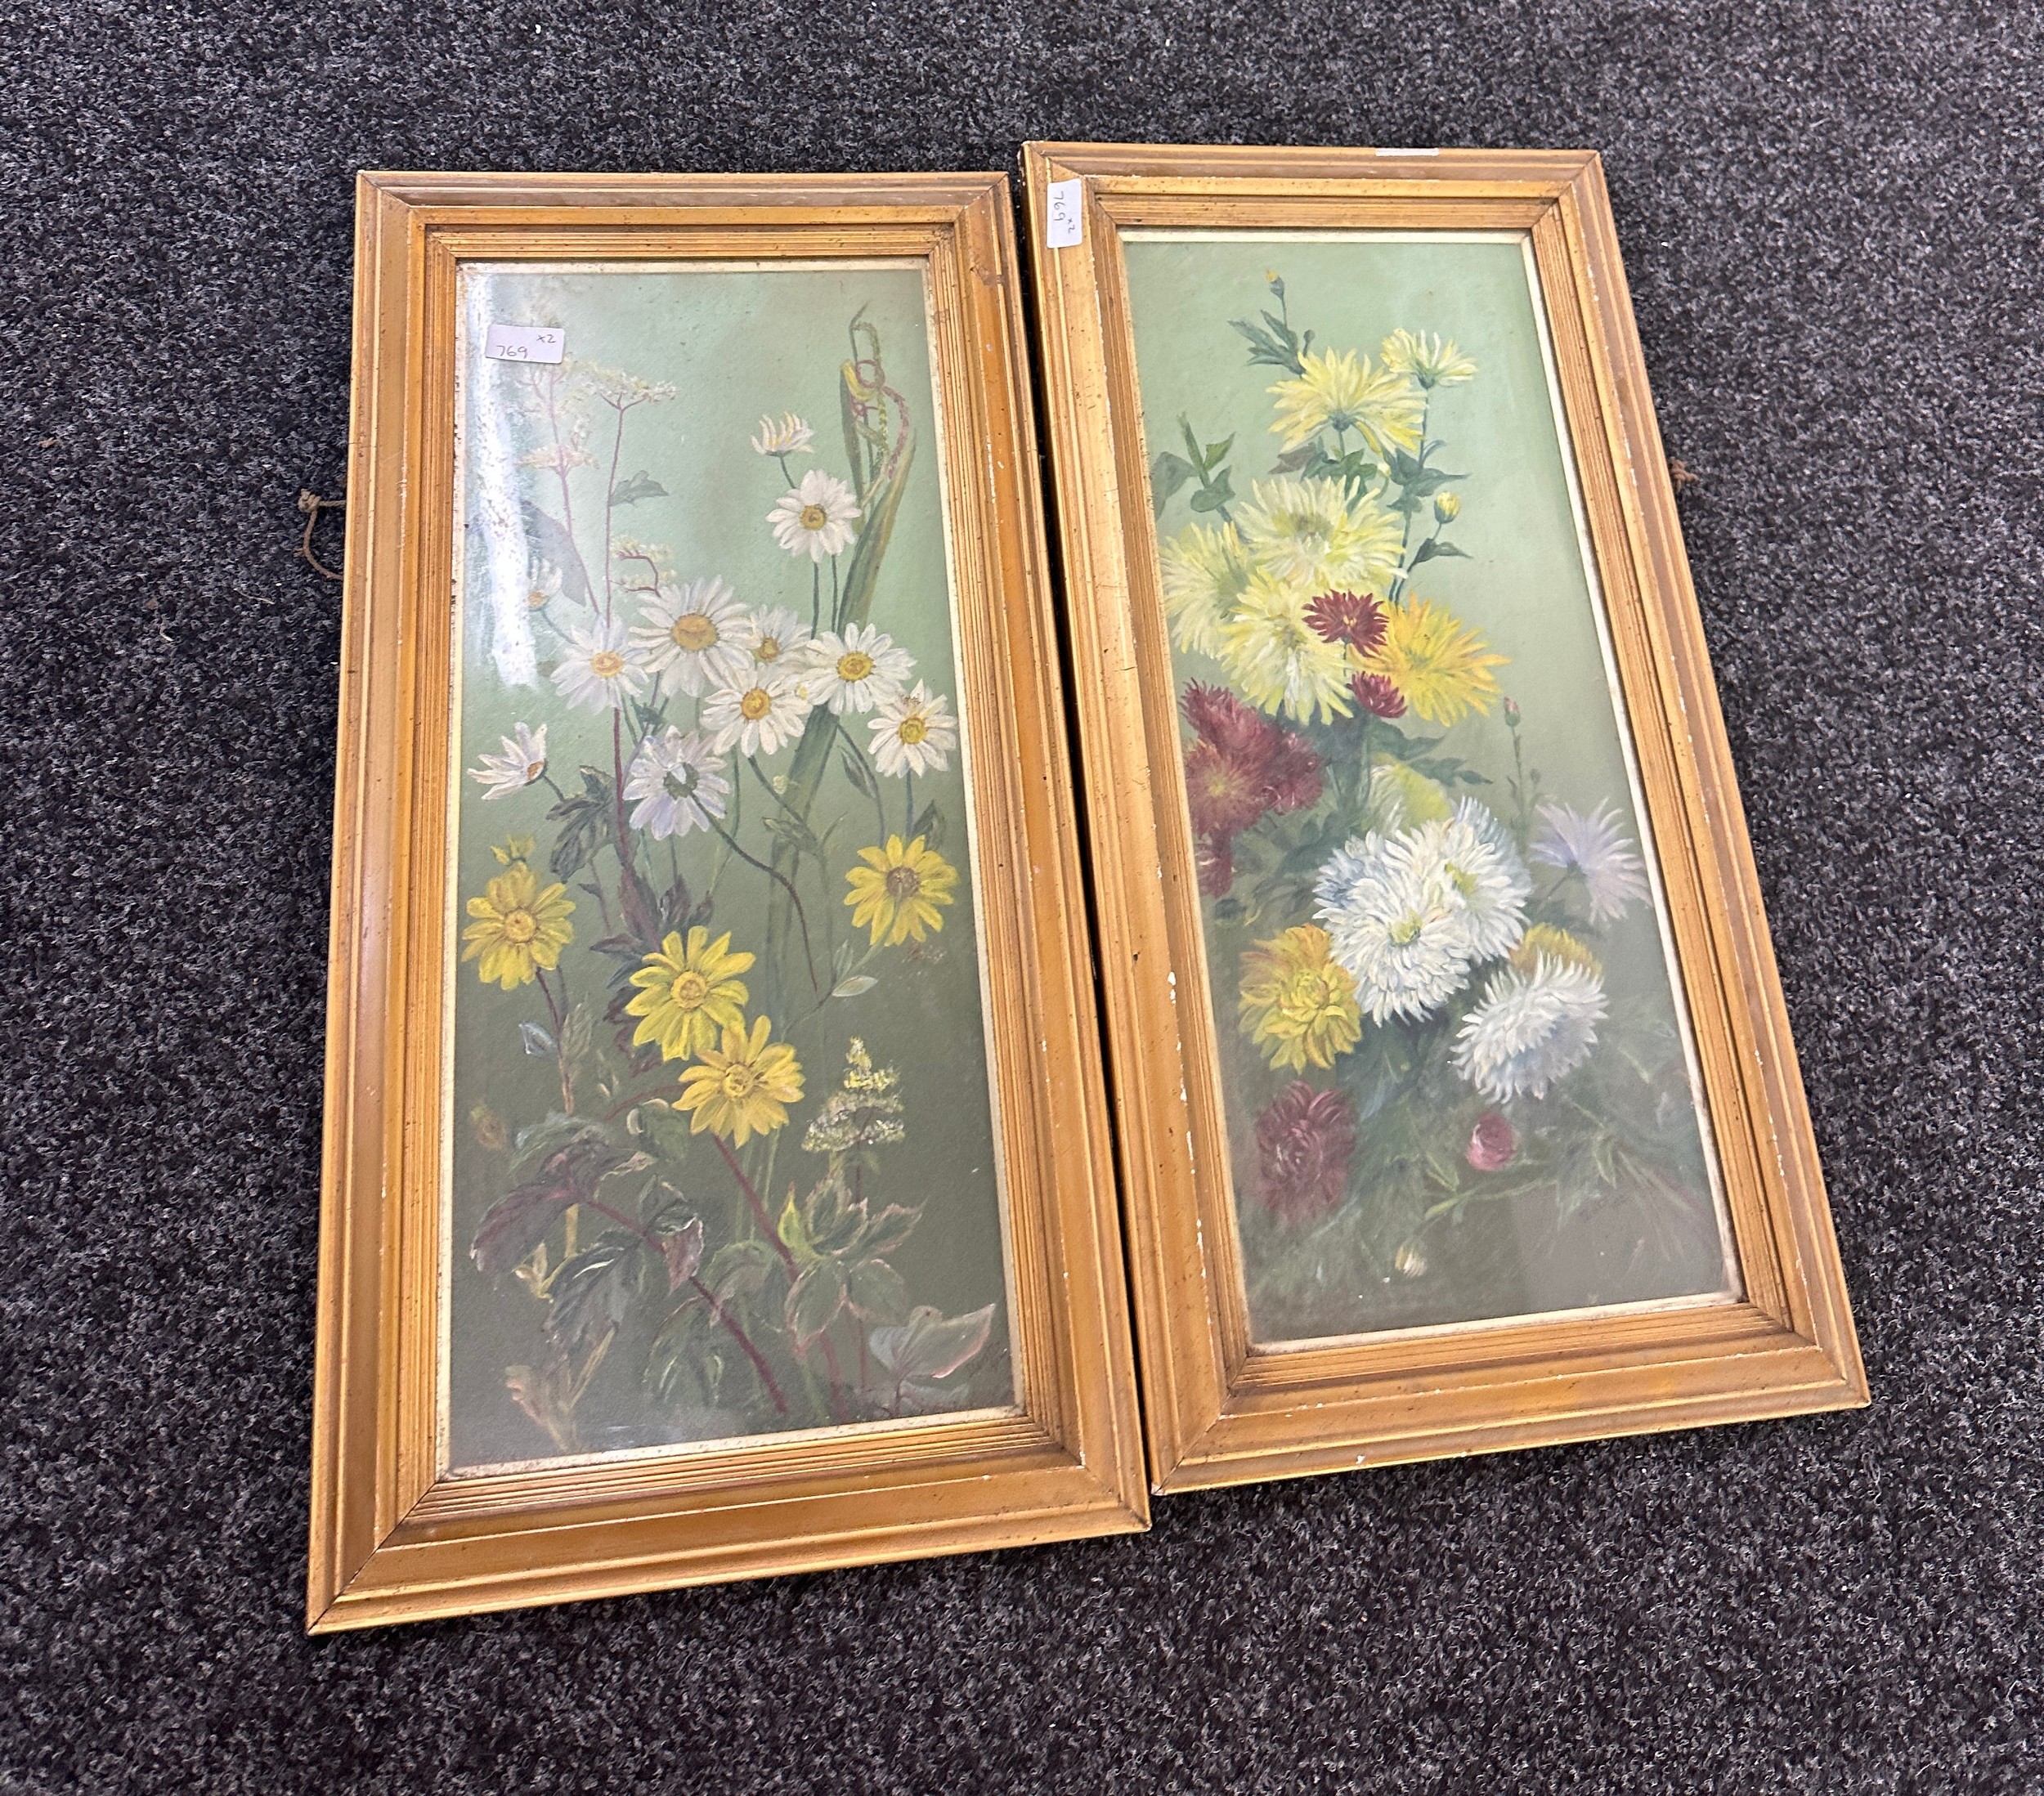 2 Signed framed paintings measures approximately 27 inches tall 13.5 inches wide